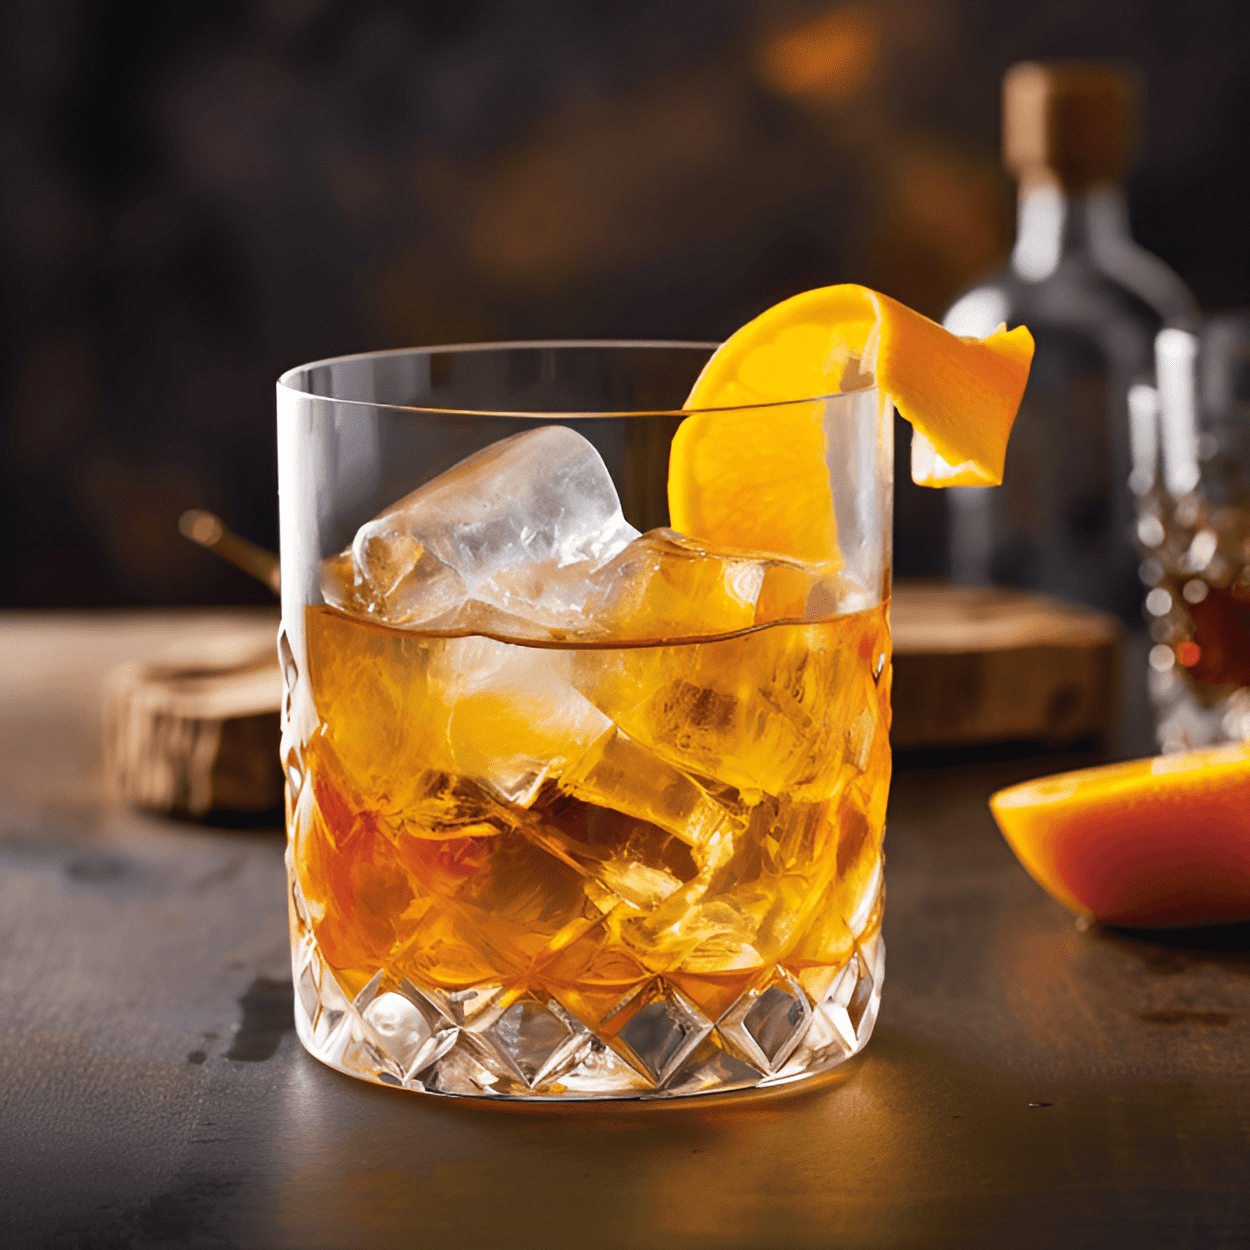 Oakley Fashioned Cocktail Recipe - The Oakley Fashioned is a robust, full-bodied cocktail. The whiskey provides a strong, smoky base, while the maple syrup adds a subtle sweetness. The orange bitters and lemon peel bring a hint of citrus, balancing out the drink and adding a refreshing finish.